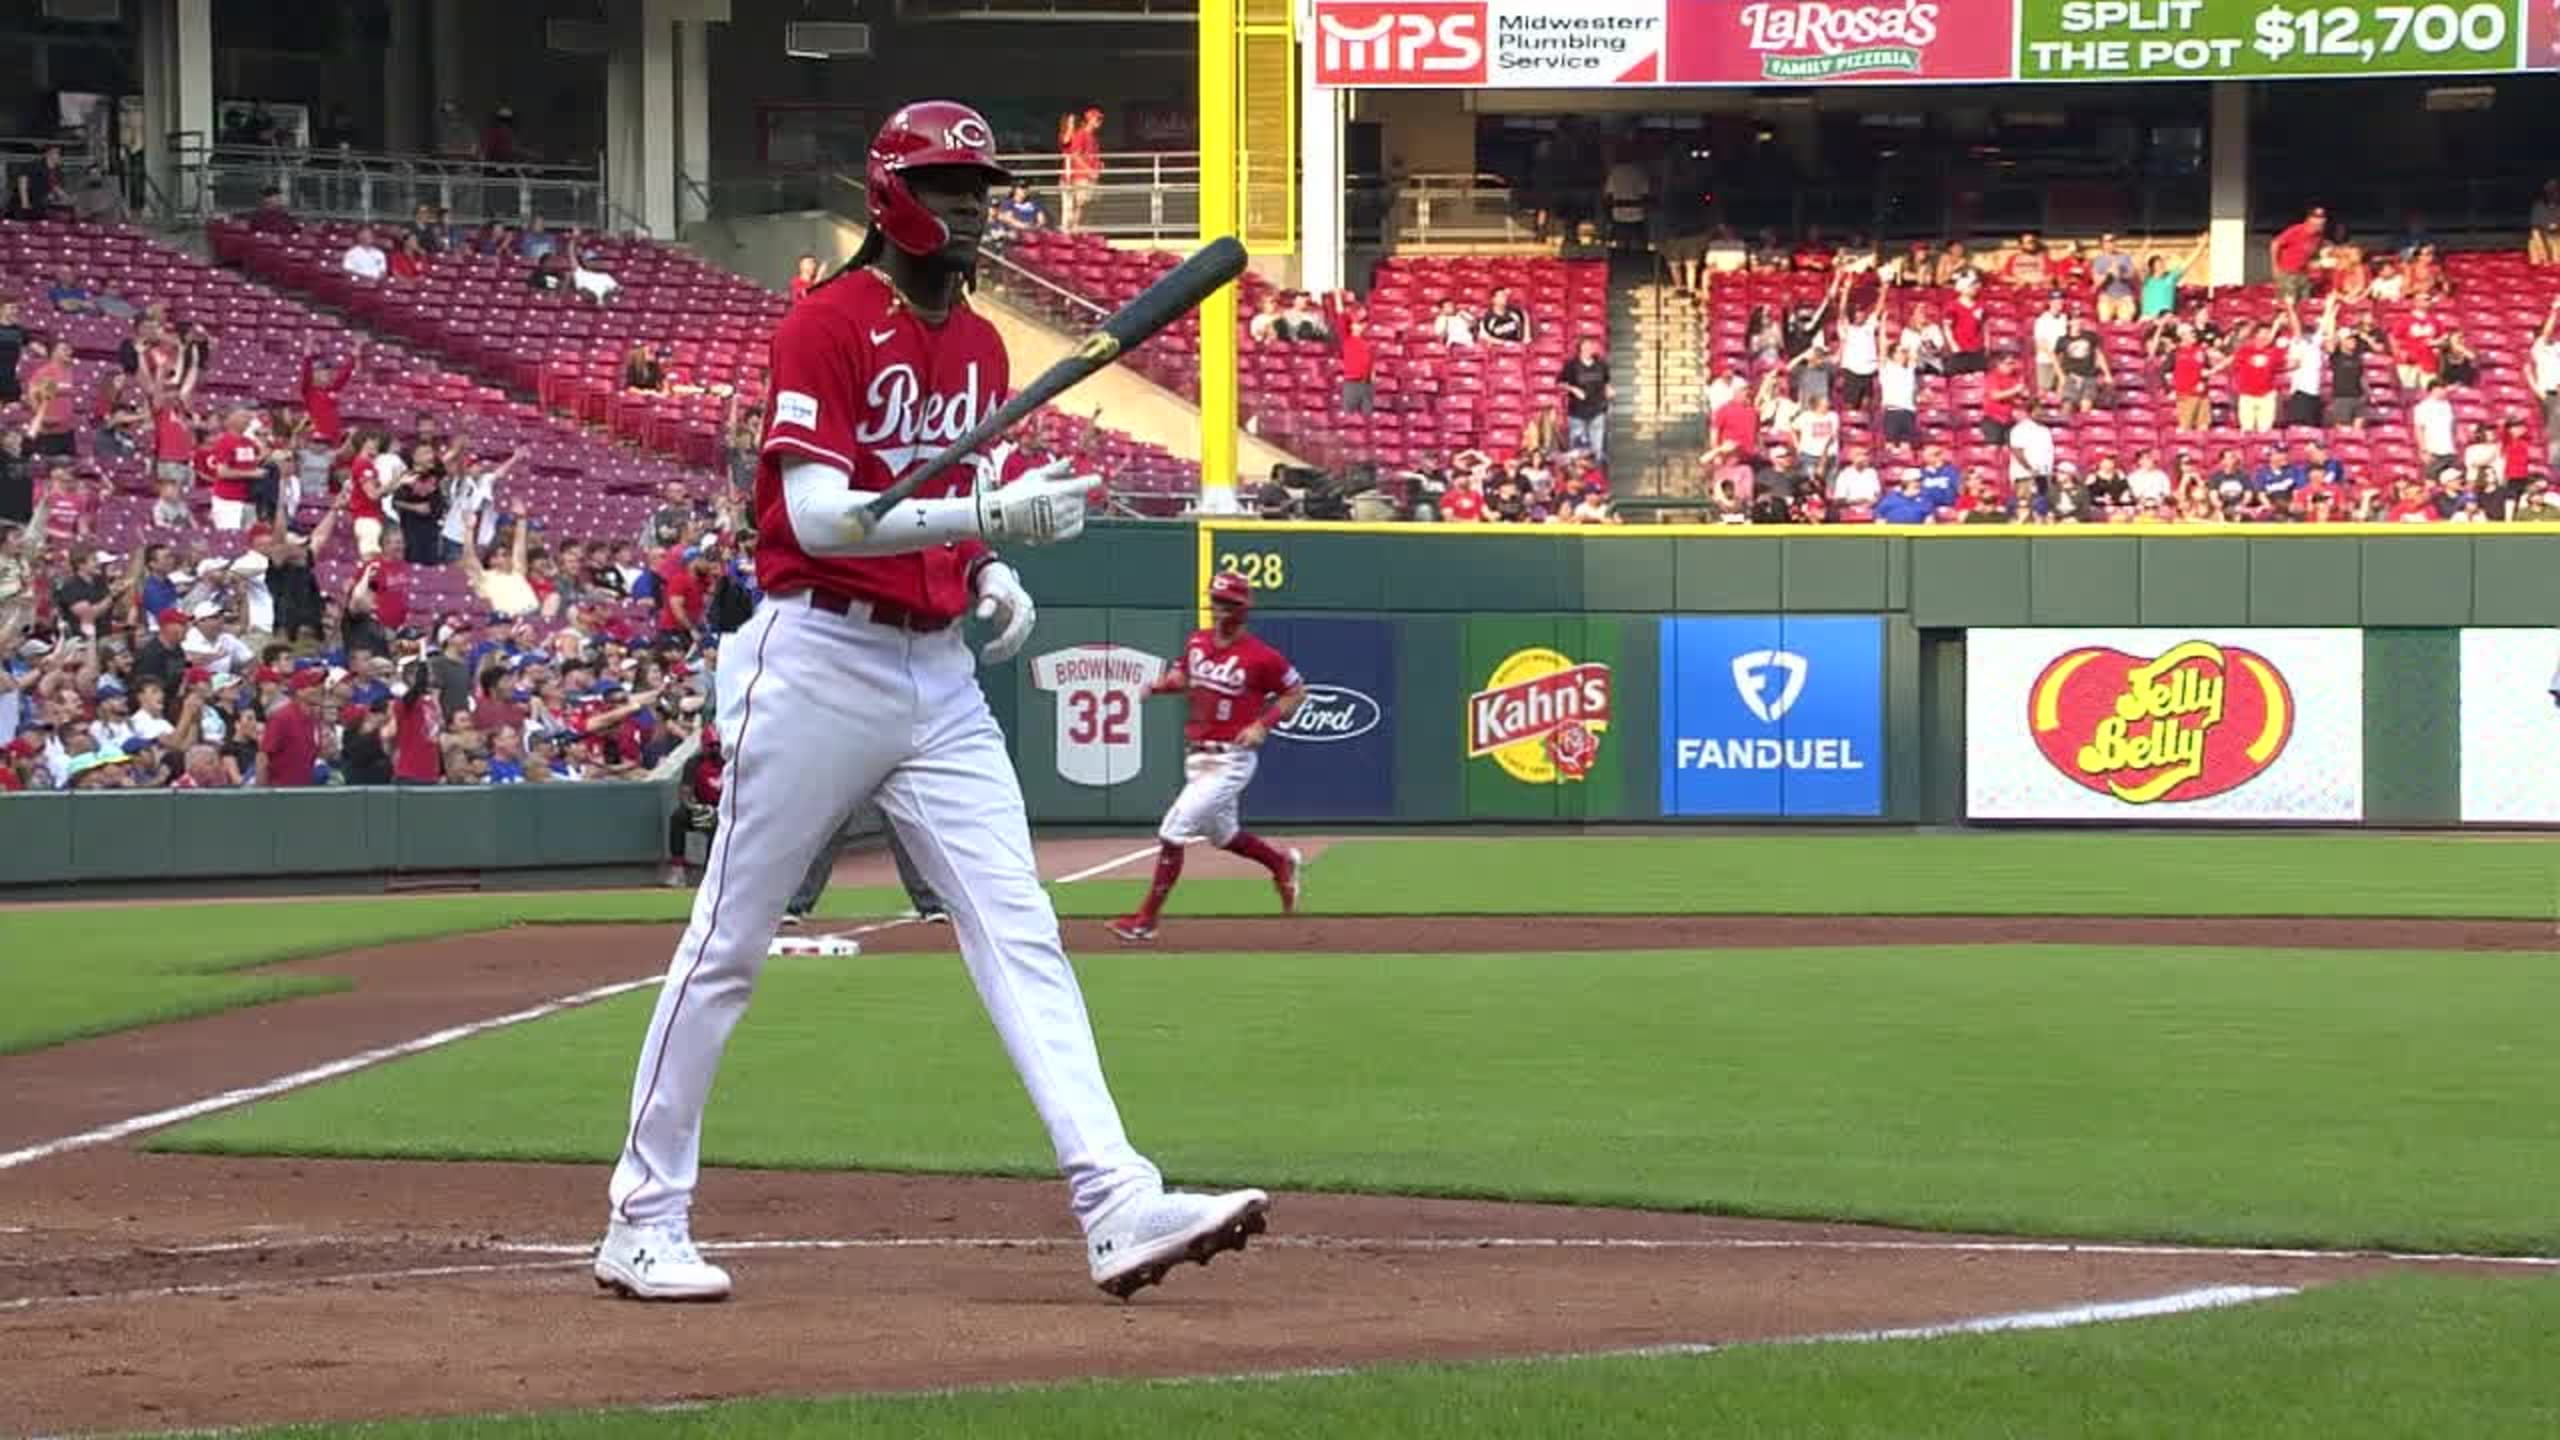 All eyes on De La Cruz after hot start with Reds